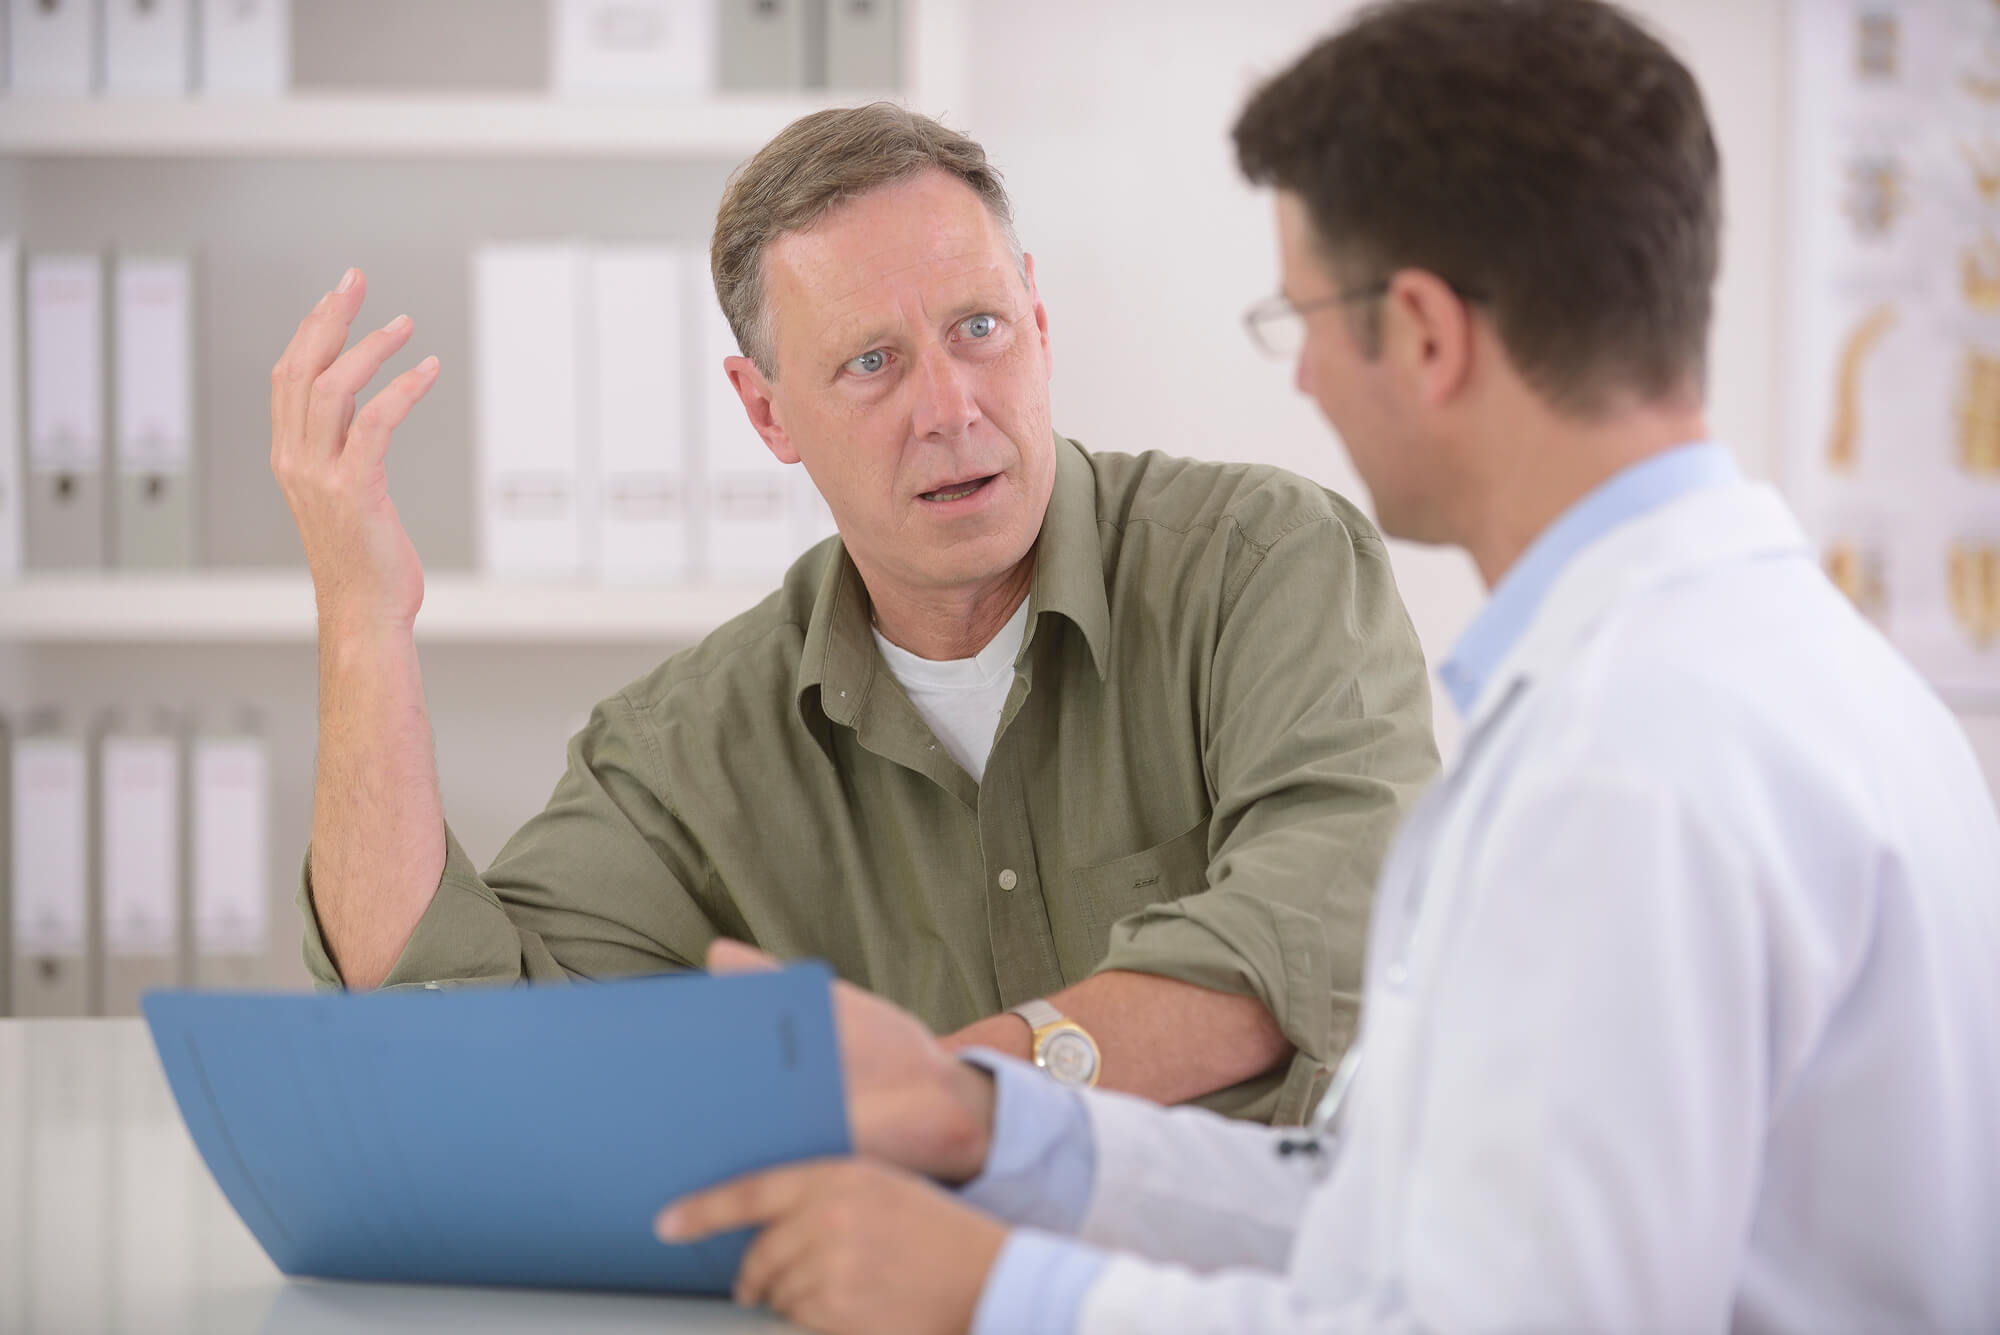 3 Tips For Managing Difficult Patients in Healthcare